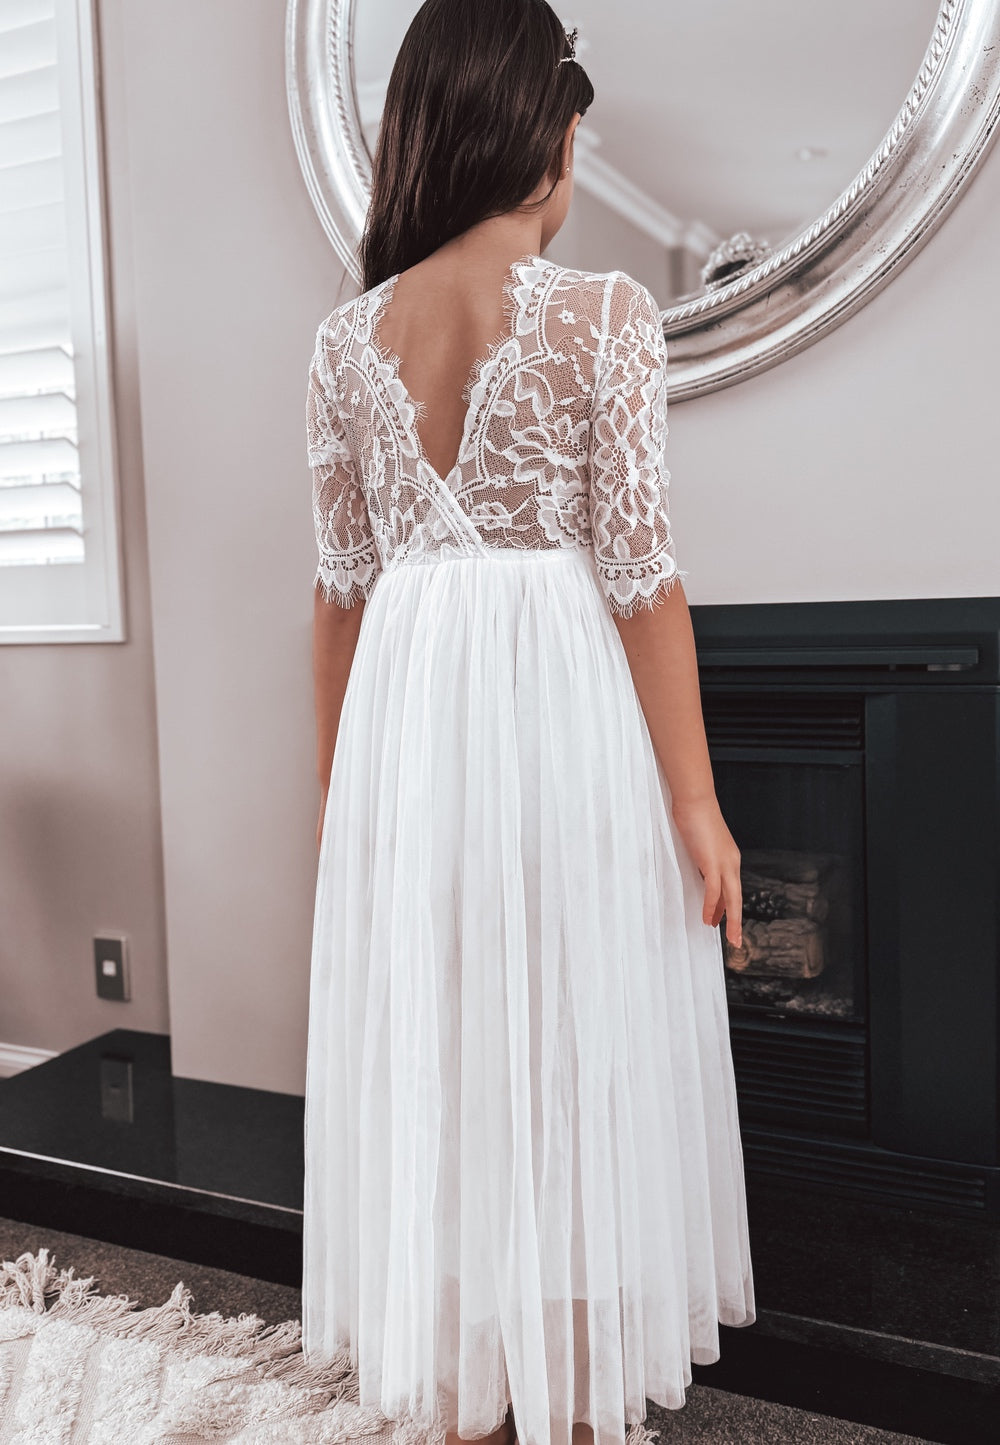 Maia White Lace Dress - Not on sale